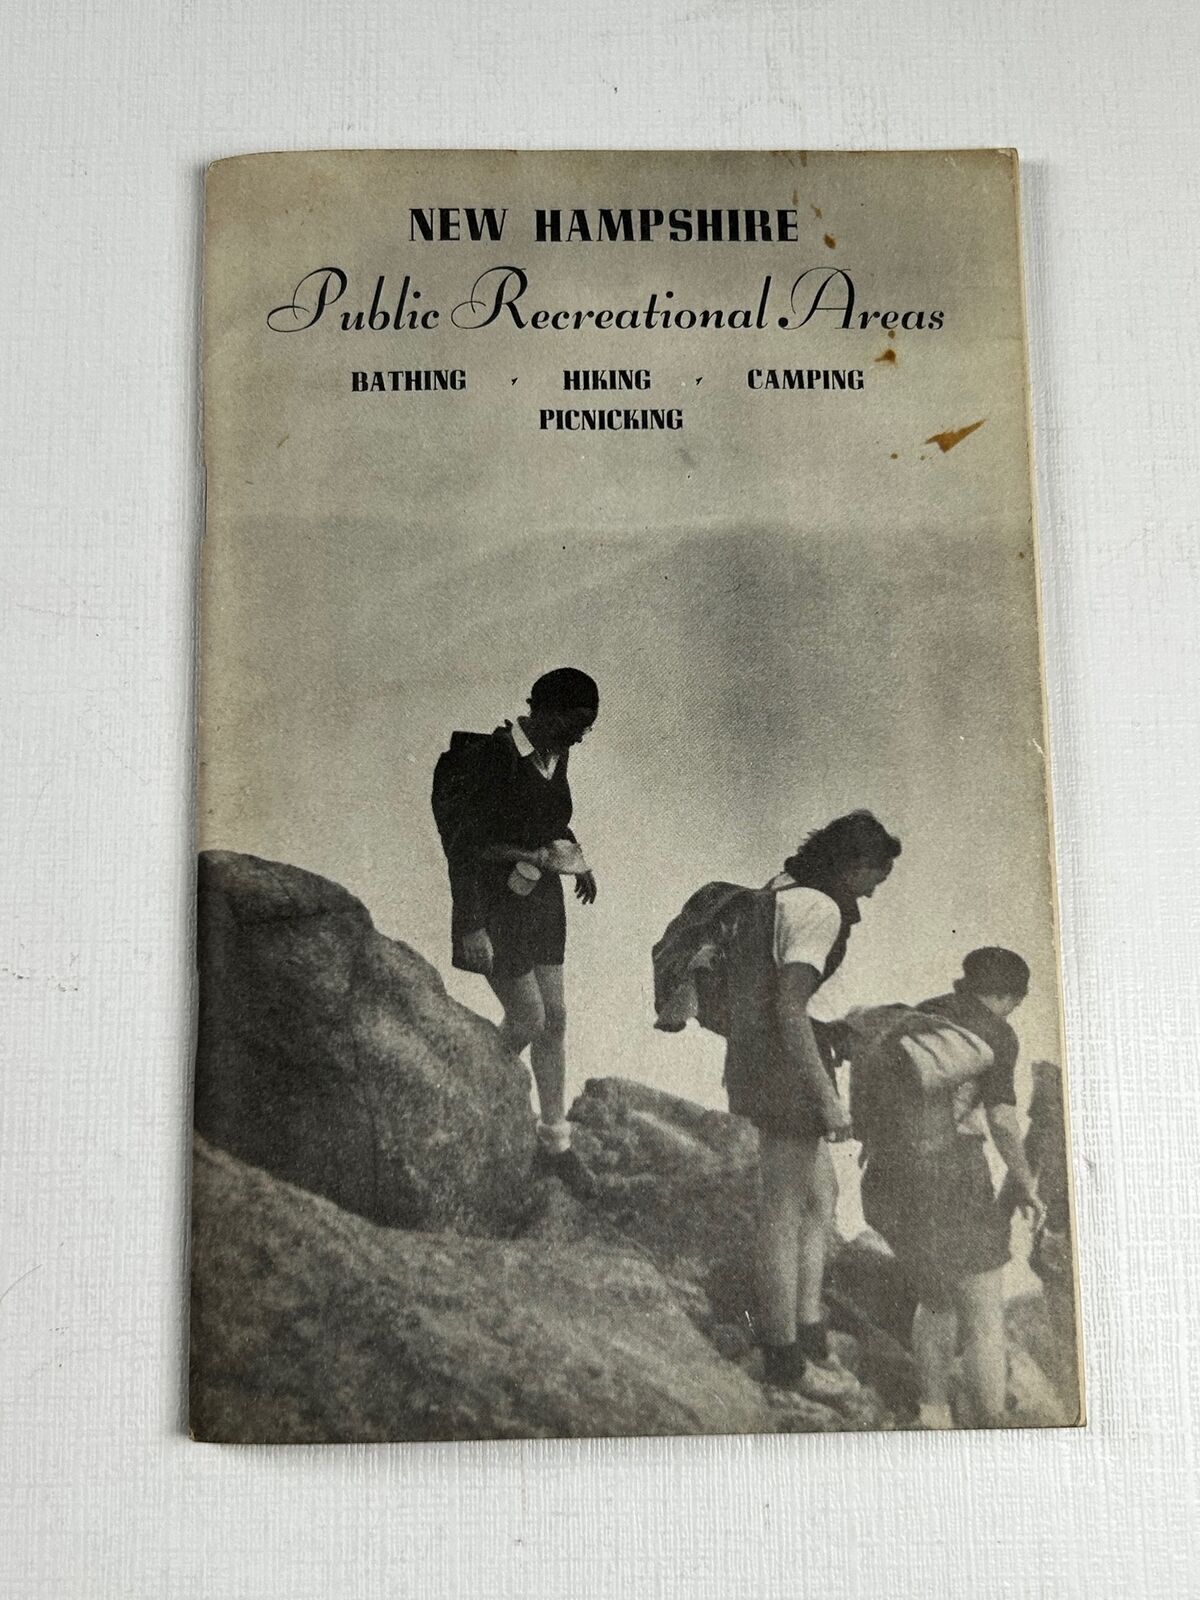 New Hampshire Public Recreation Areas 1938 Travel Booklet